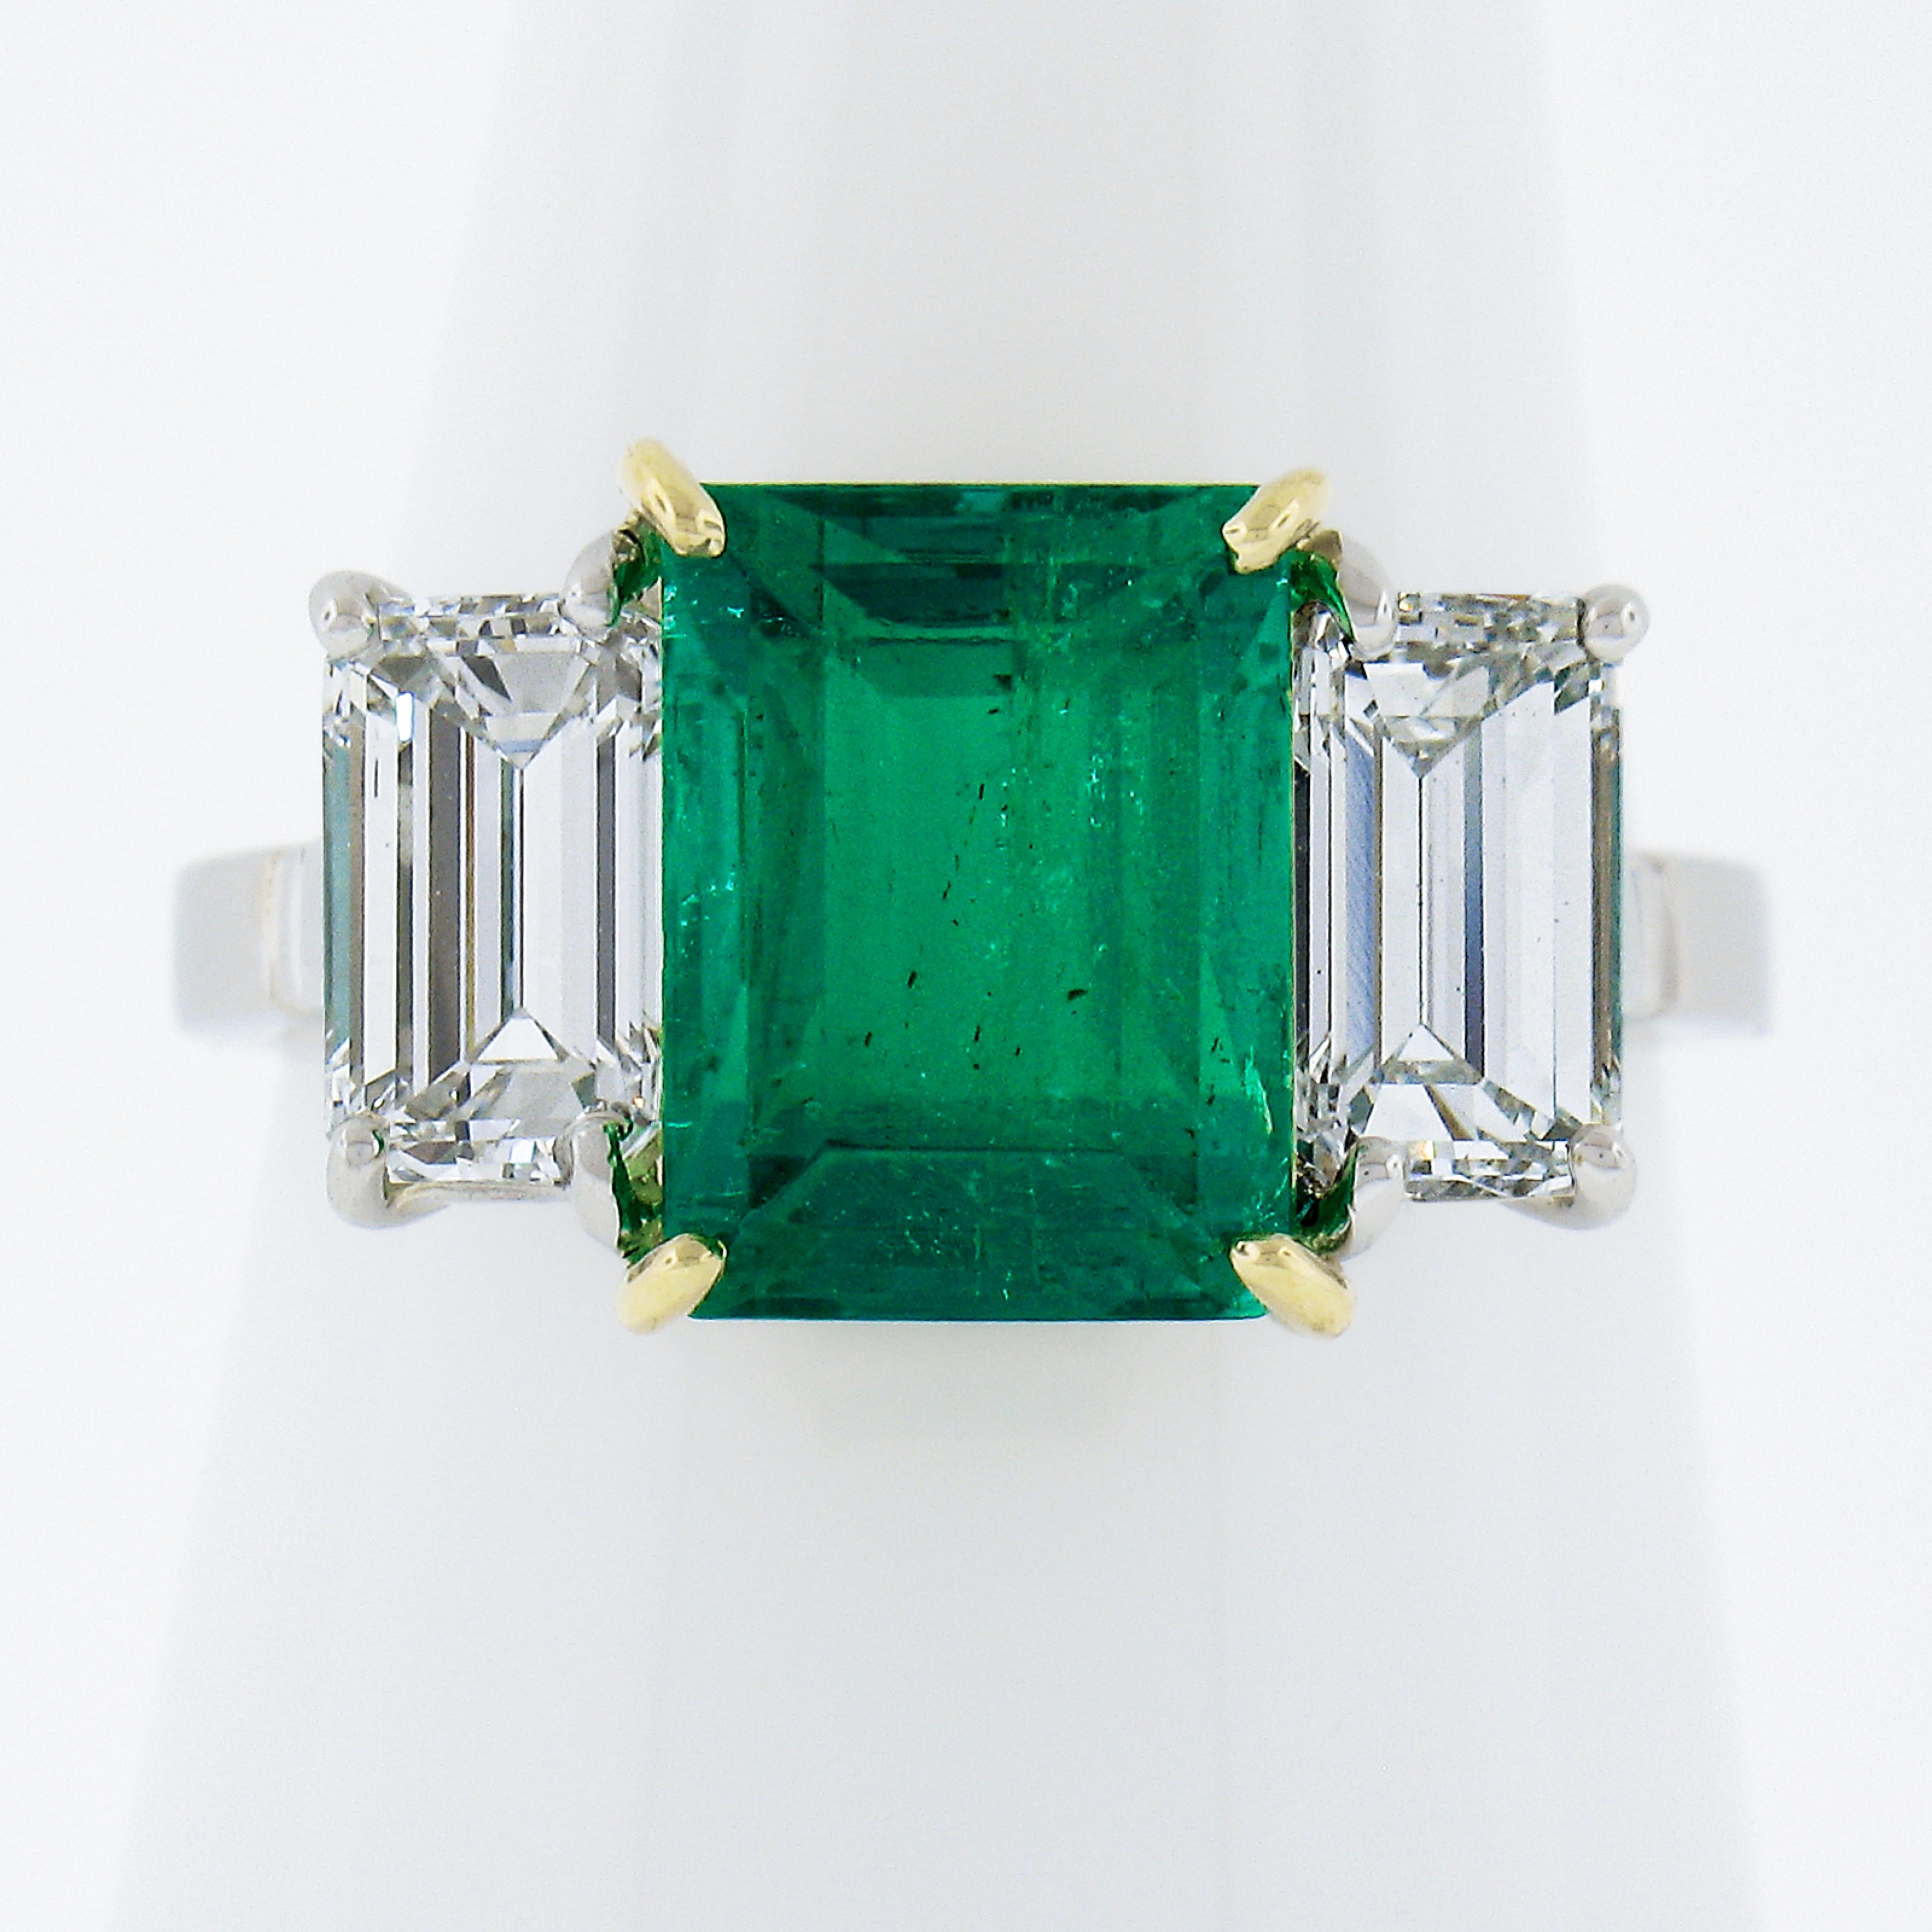 This elegant and timeless custom made ring centers a wonderful Colombian emerald with minor oil only! On either side is a gorgeous elongated emerald cut diamond - GIA graded as colorless and VS clarity. This ring comes with 3 certifications and high